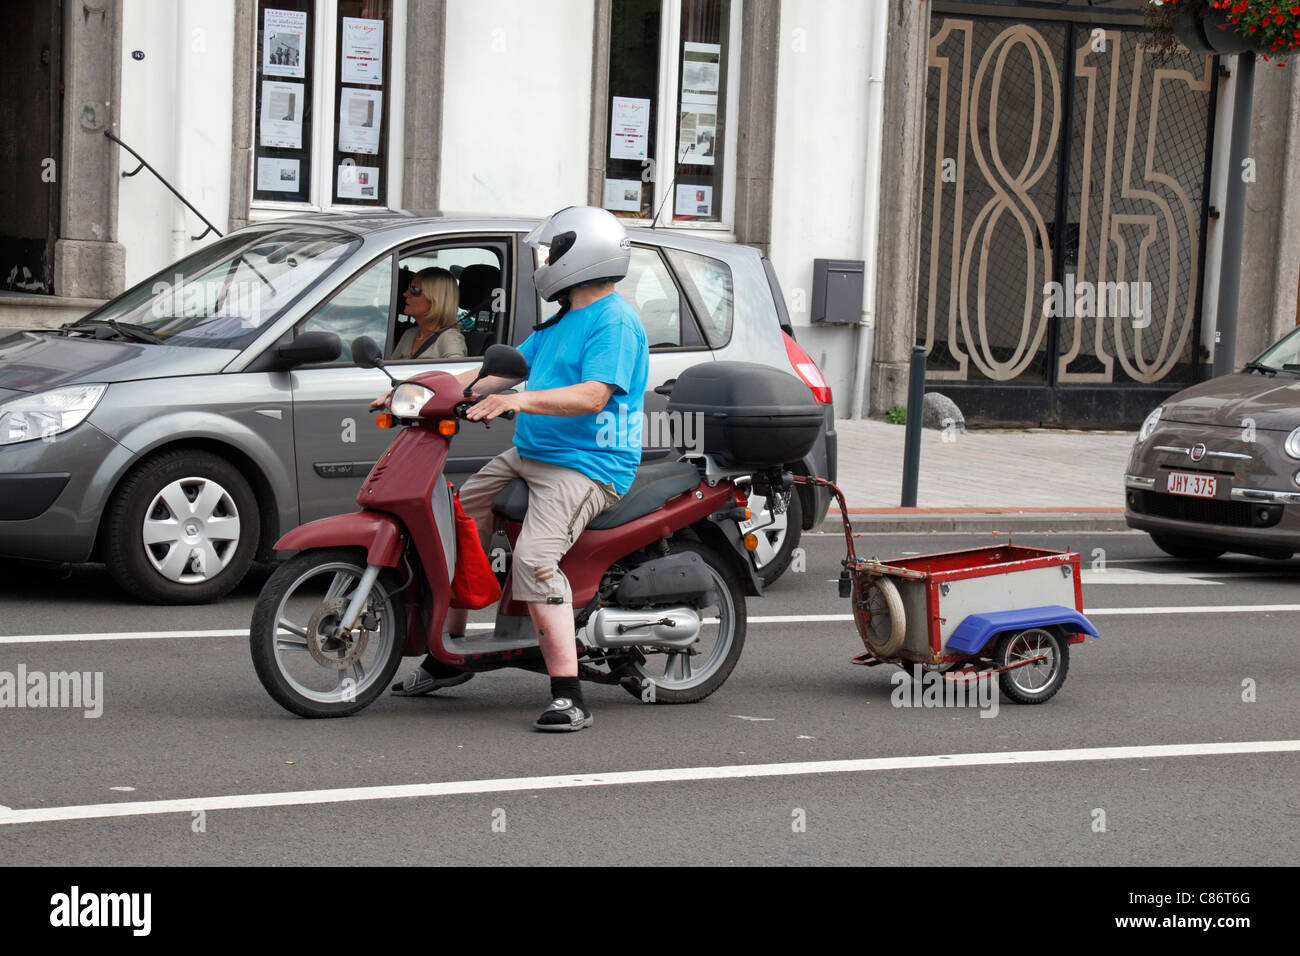 Casually dressed man on a Honda motor scooter with attached trailer in the town of Waterloo, Belgium. Stock Photo